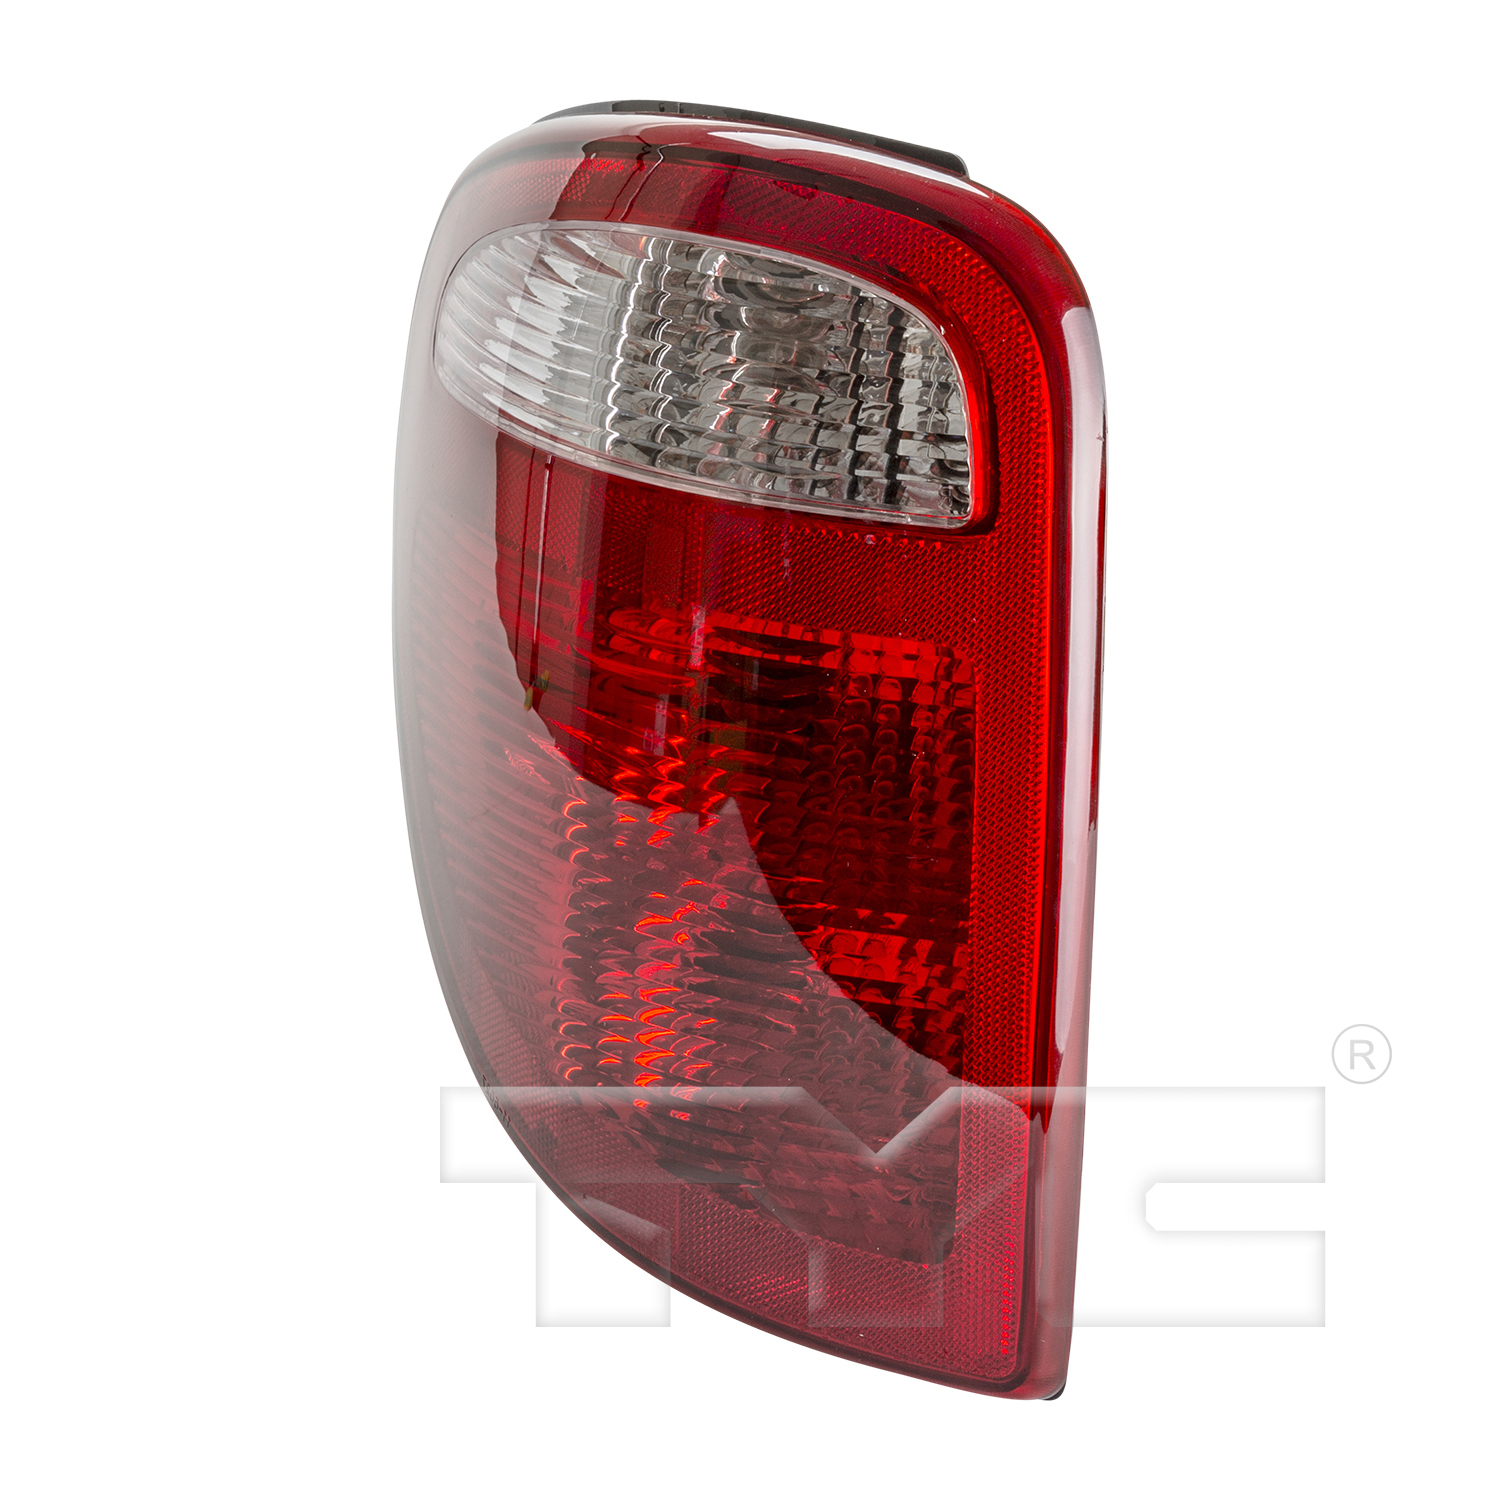 Aftermarket TAILLIGHTS for CHRYSLER - VOYAGER, VOYAGER,01-03,LT Taillamp assy